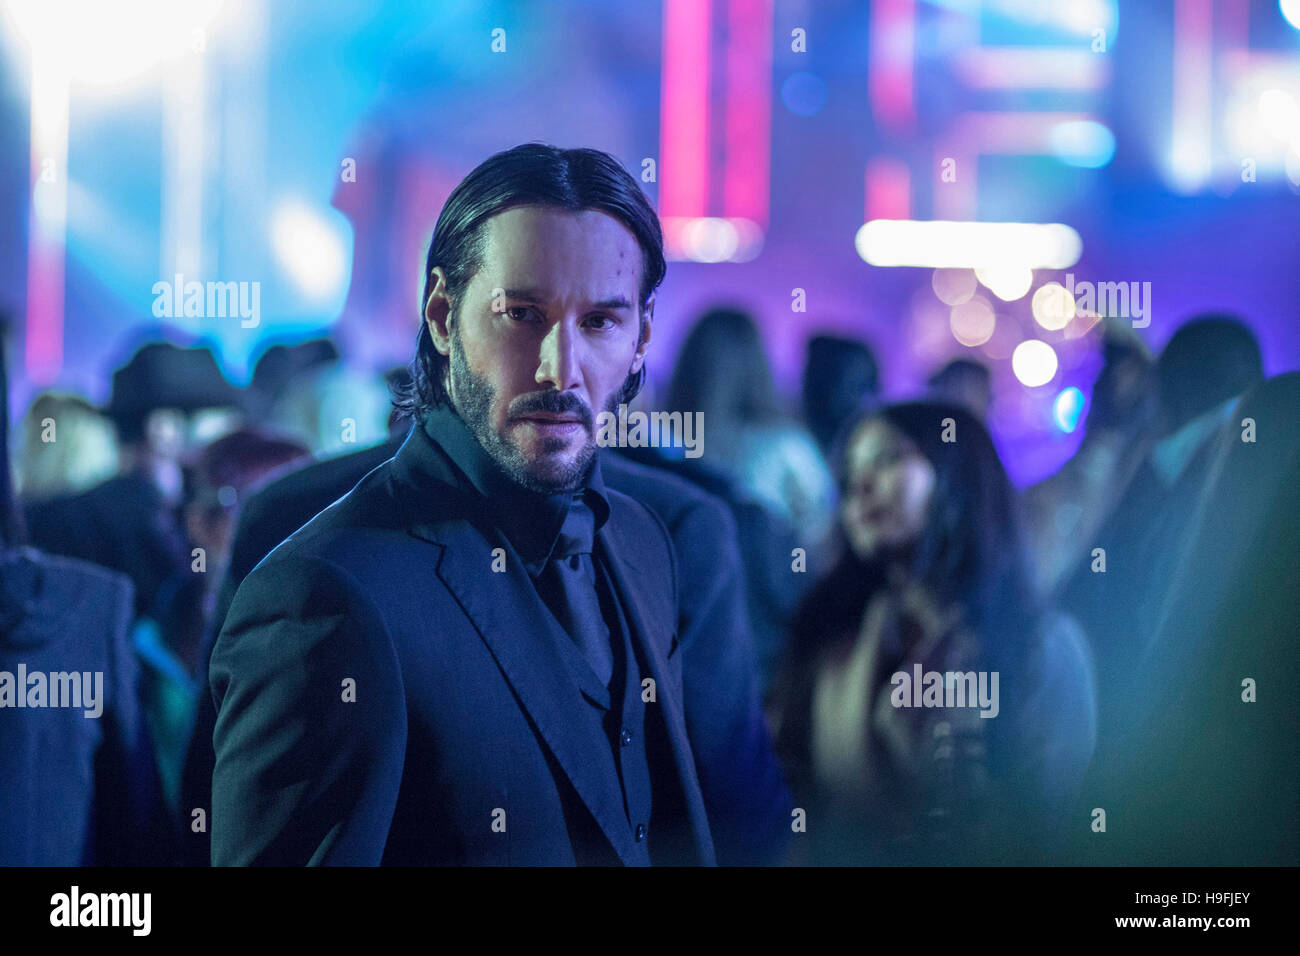 RELEASE DATE: February 10, 2017 TITLE: John Wick: Chapter 2 STUDIO: DIRECTOR: Chad Stahelski PLOT: The continuing adventures of former hitman, John Wick STARRING: Keanu Reeves as John Wick (Credit: c Lionsgate/Entertainment Pictures/) Stock Photo